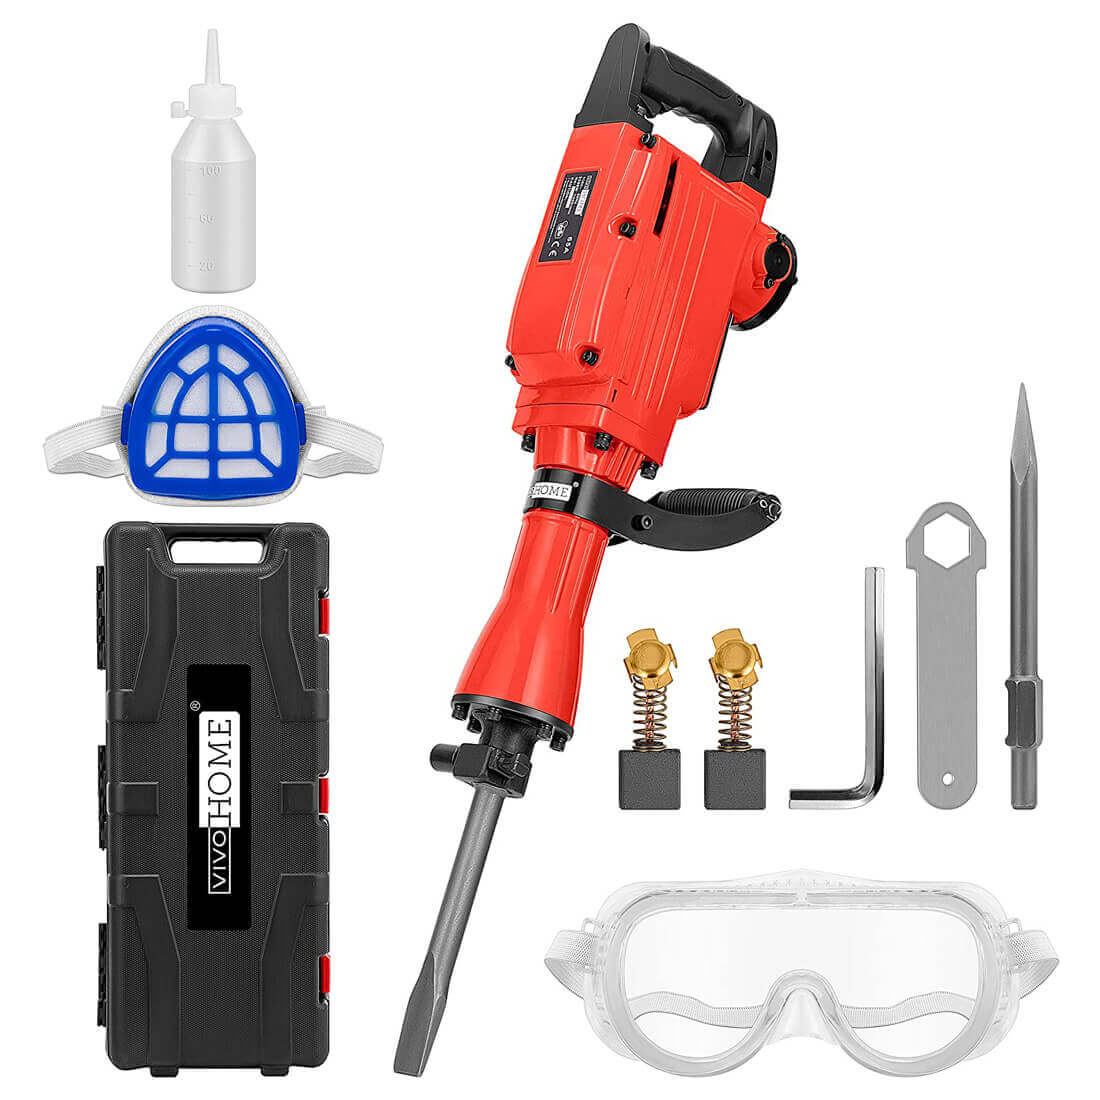 VIVOHOME 2200W 400 RPM Electric Demolition Jack Hammer Heavy Duty Concrete Breaker Drills Kit with Carrying Case Gloves Goggle and Removal tools